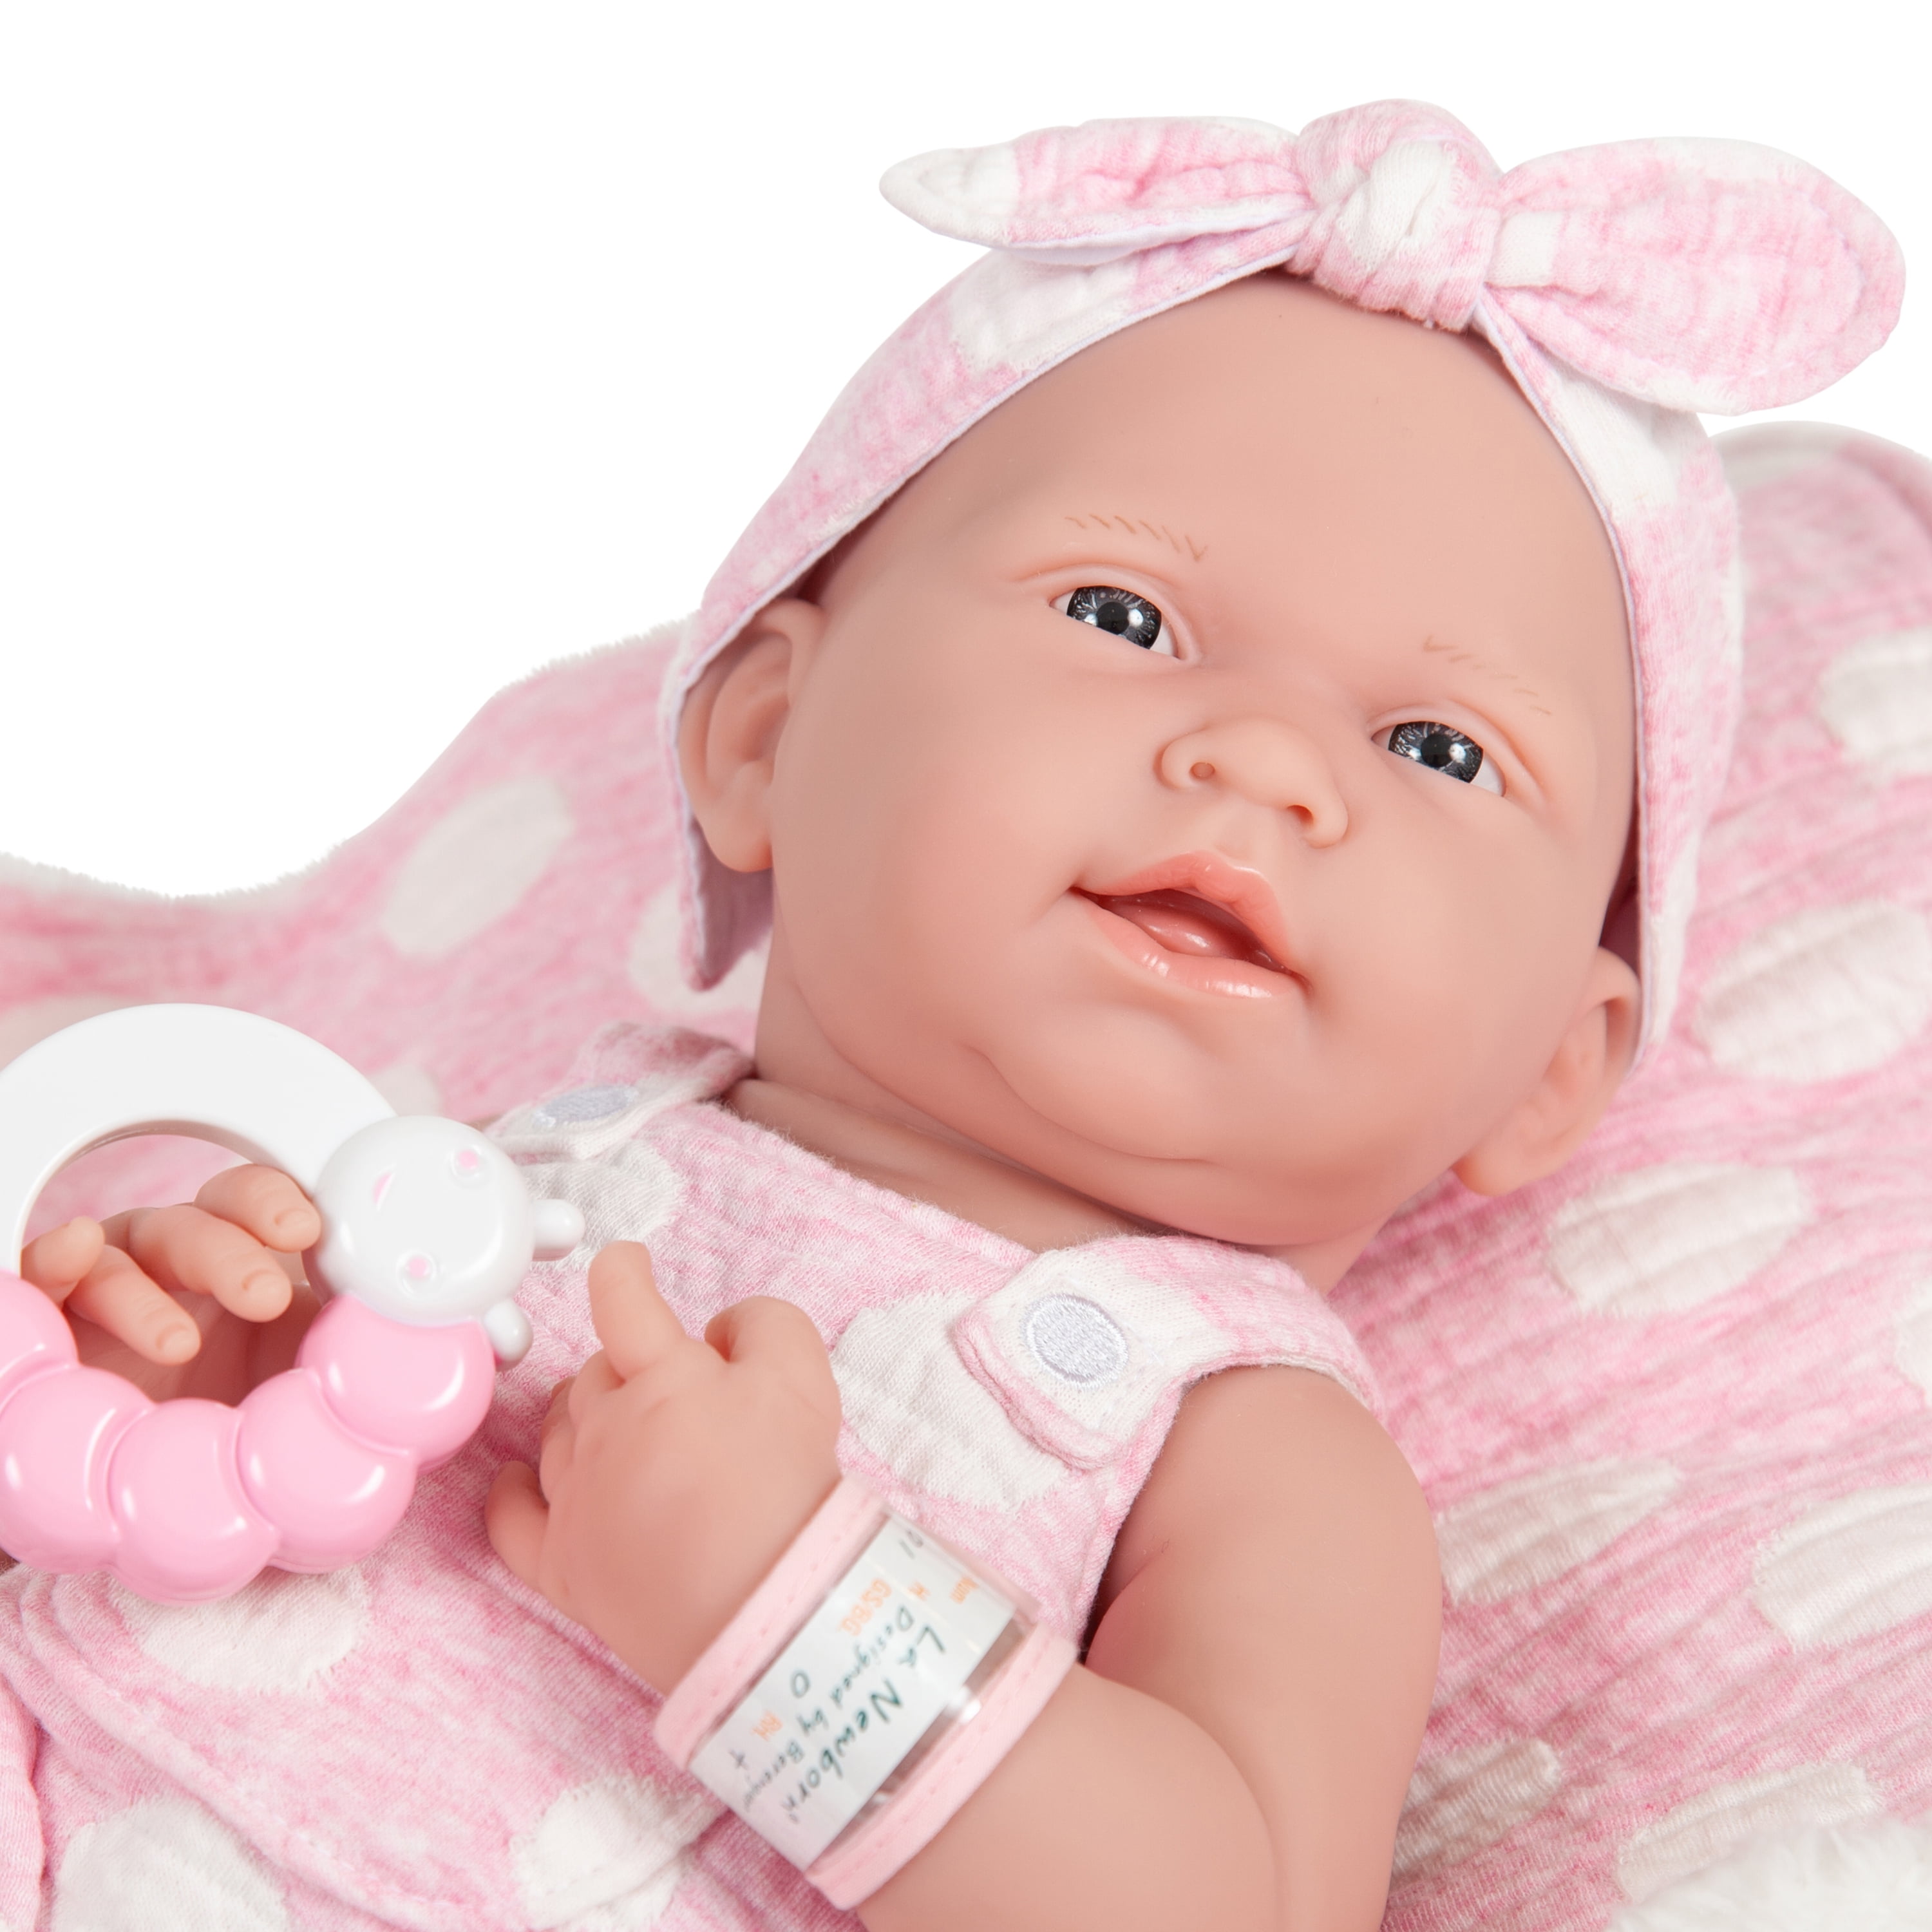 JC Toys La Newborn All-Vinyl-Anatomically Correct Real Girl 15" Baby Doll in Pink and Deluxe Accessories, Designed Berenguer. Walmart.com